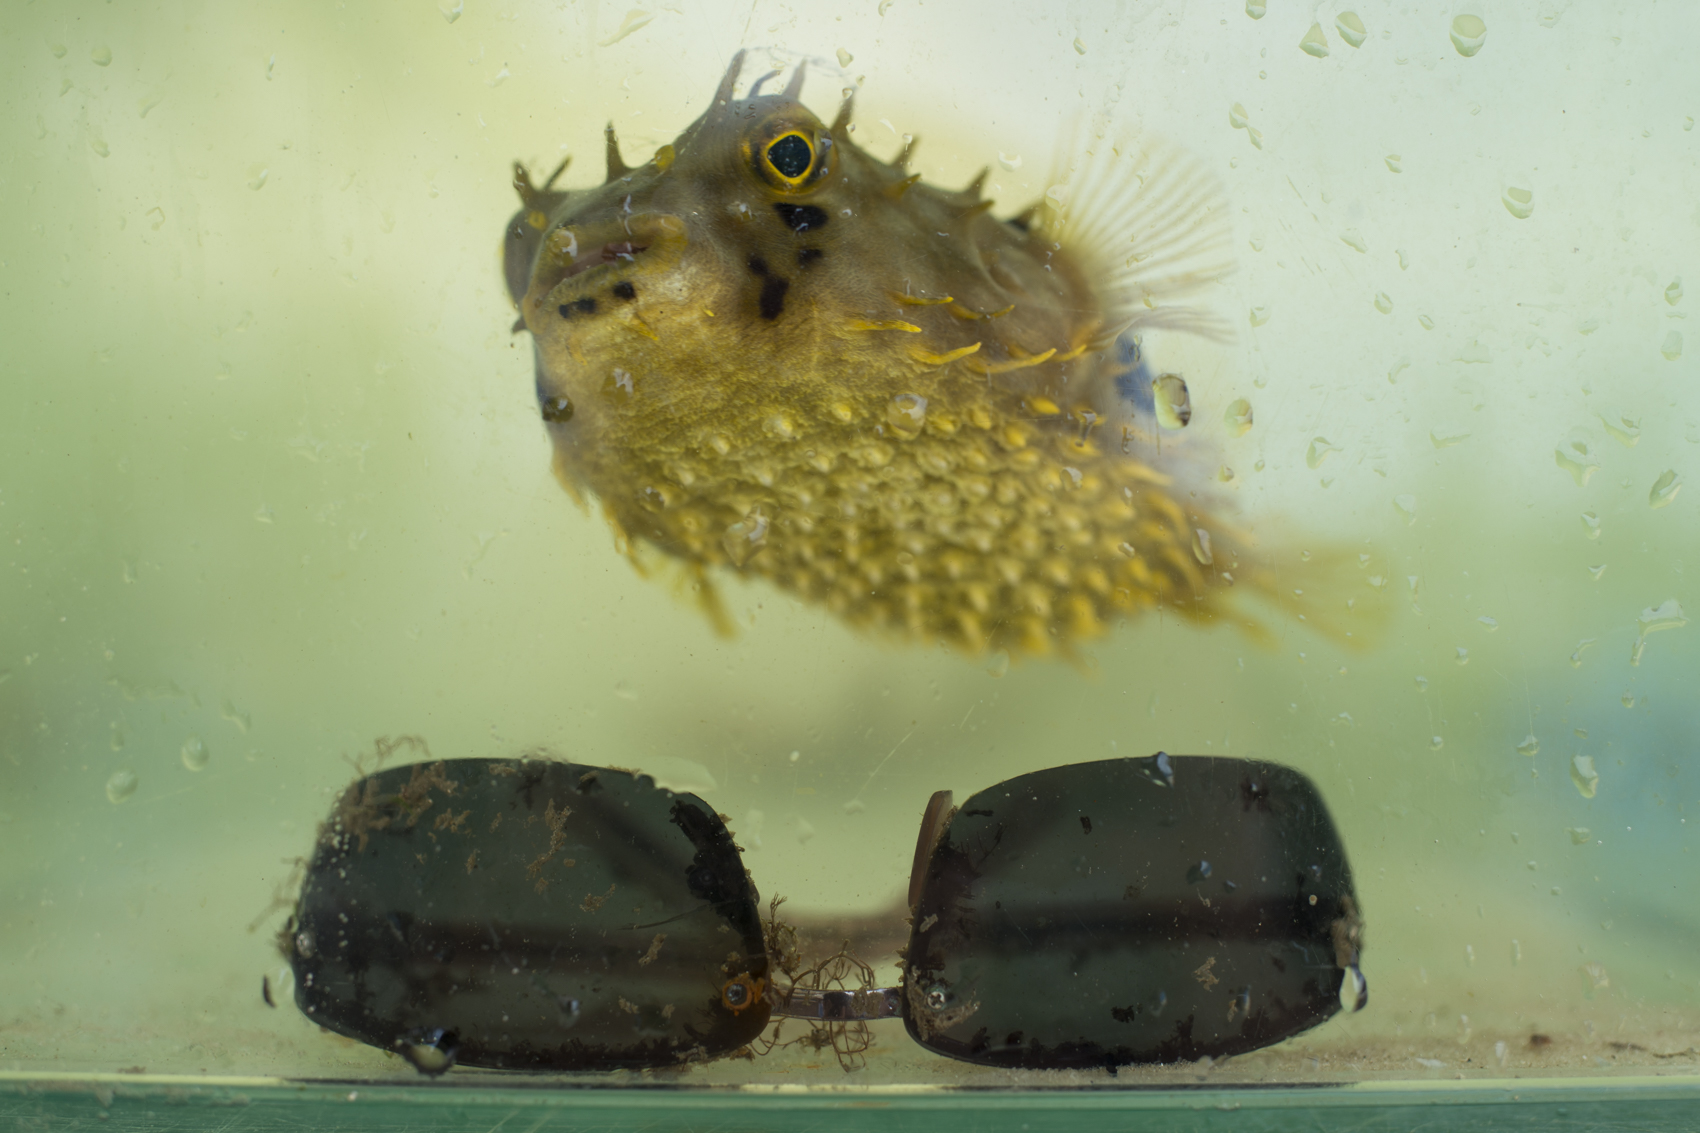  To facilitate the understanding and strengthen the bond between students and the environment, Ed uses visual appeals in his classes. To exemplify local marine life and explain physical qualities and some behaviors, a pufferfish is put in a aquarium 